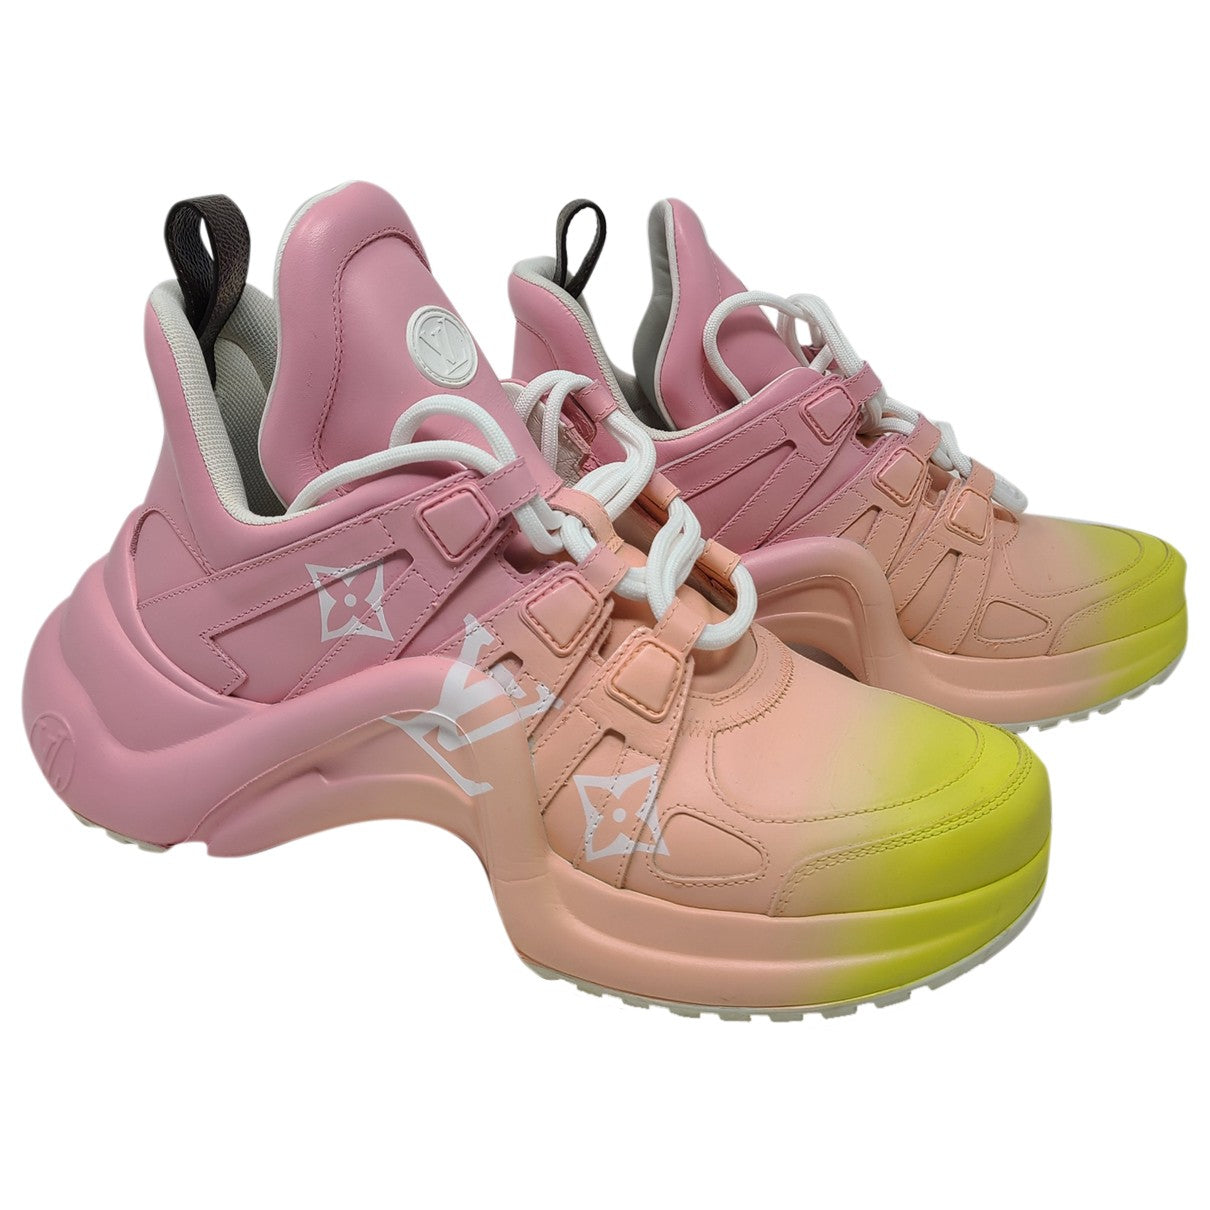 Louis Vuitton Sneakers Archlight Pink